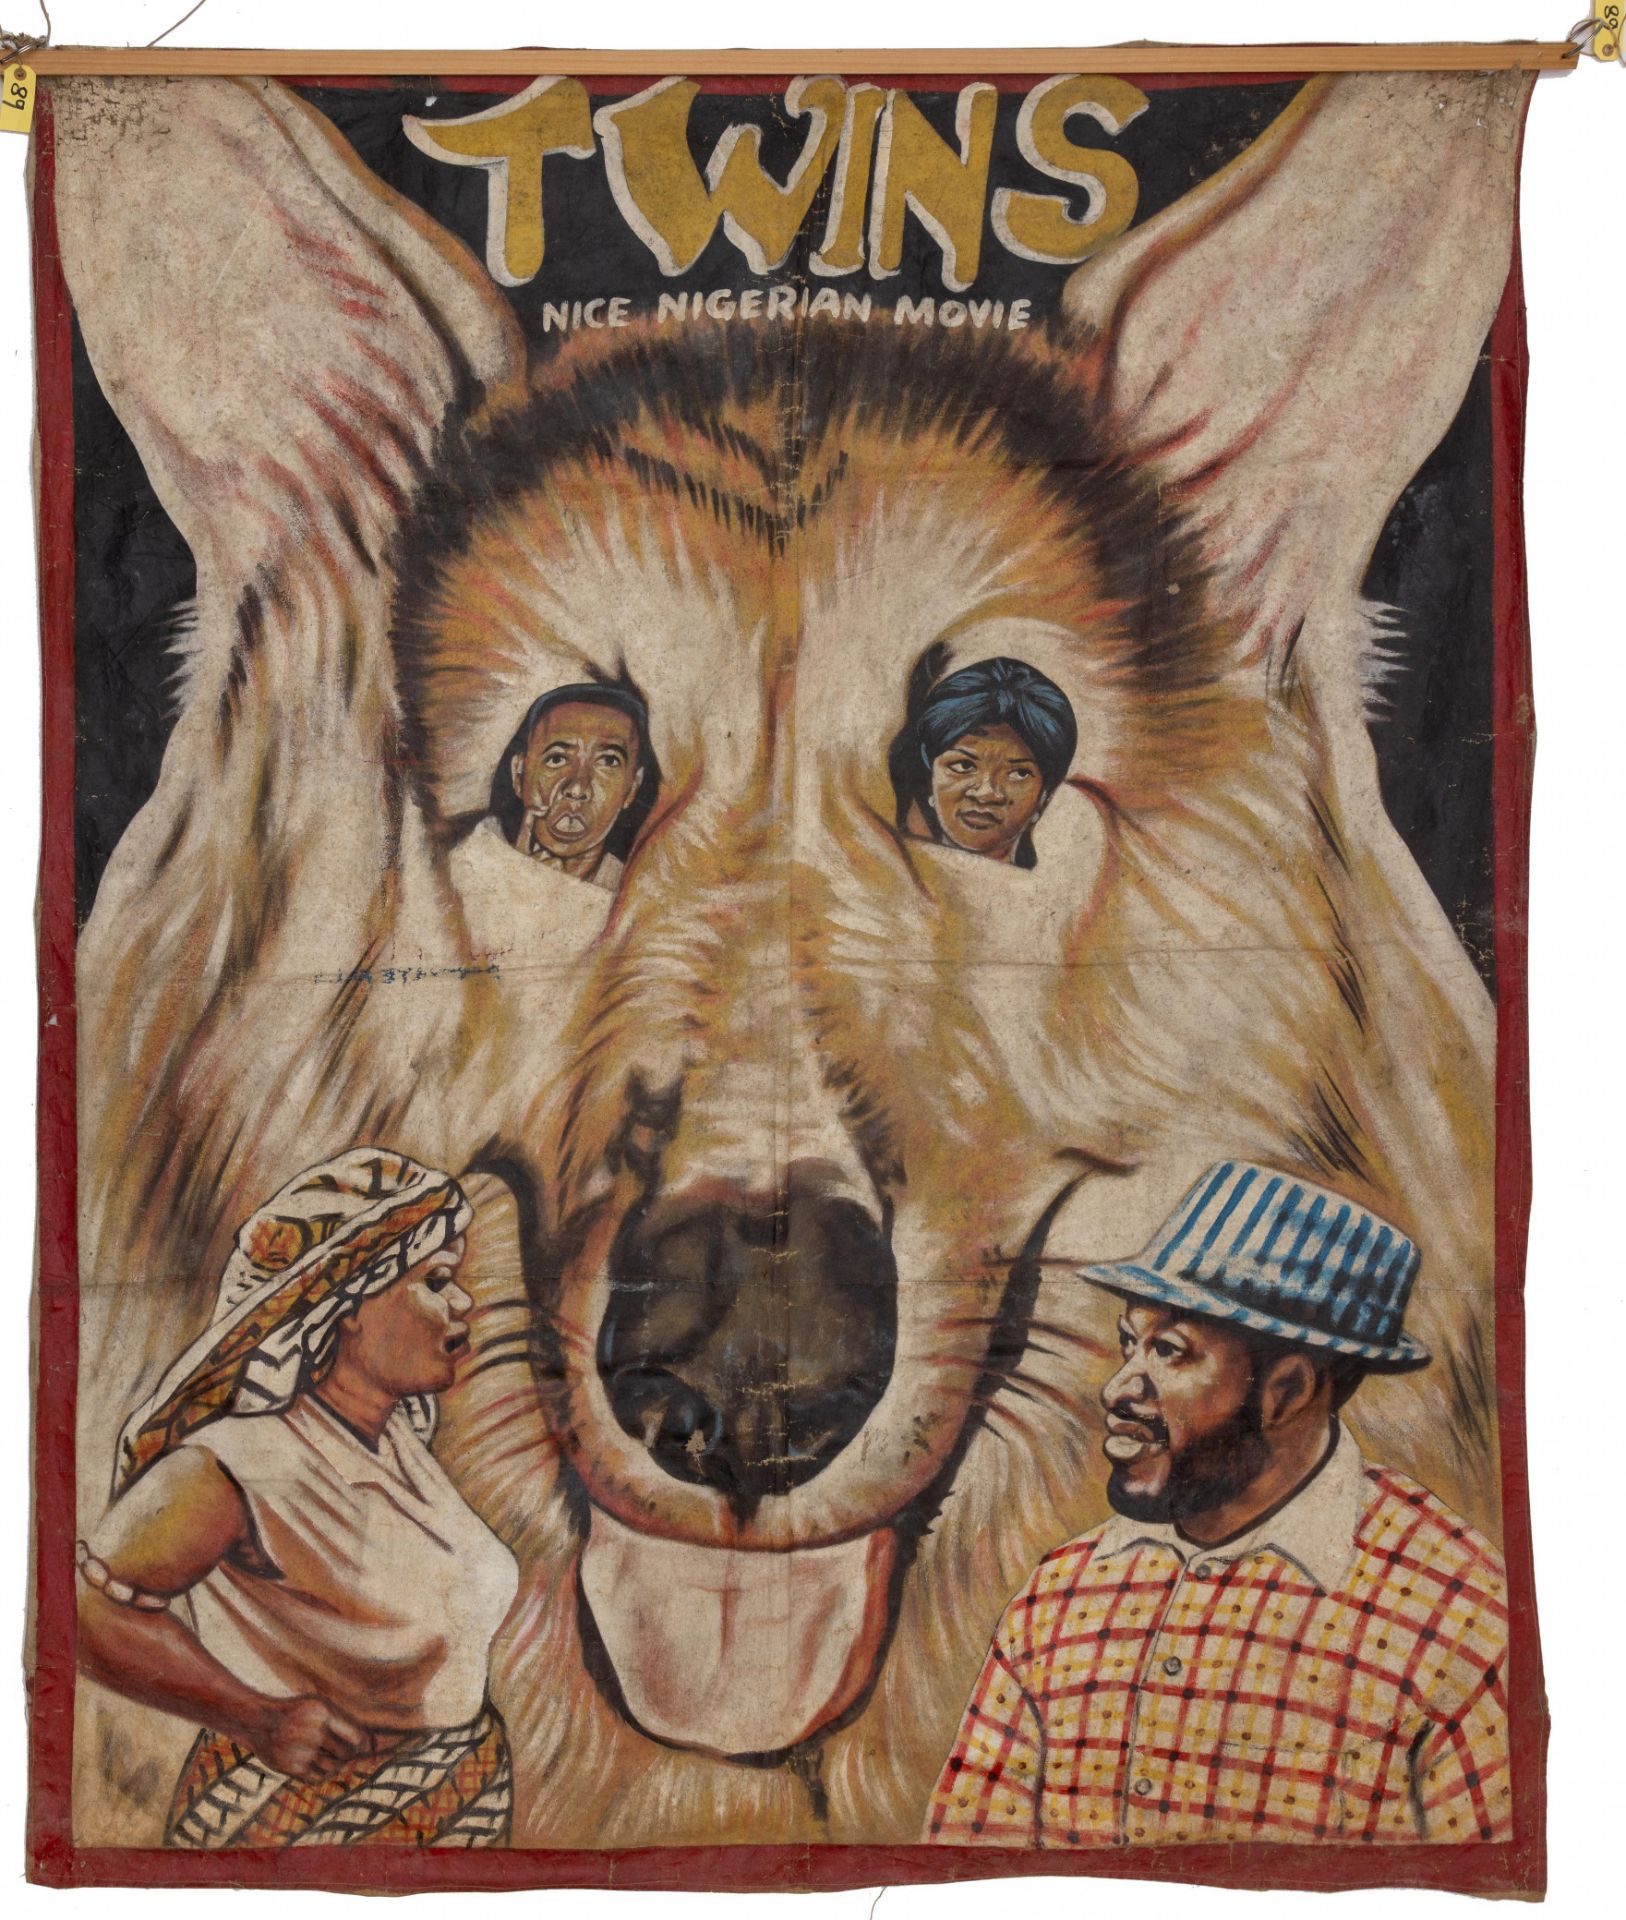 Ghanaian handpainted film poster of Nigerian movie 'Twins', unsigned.